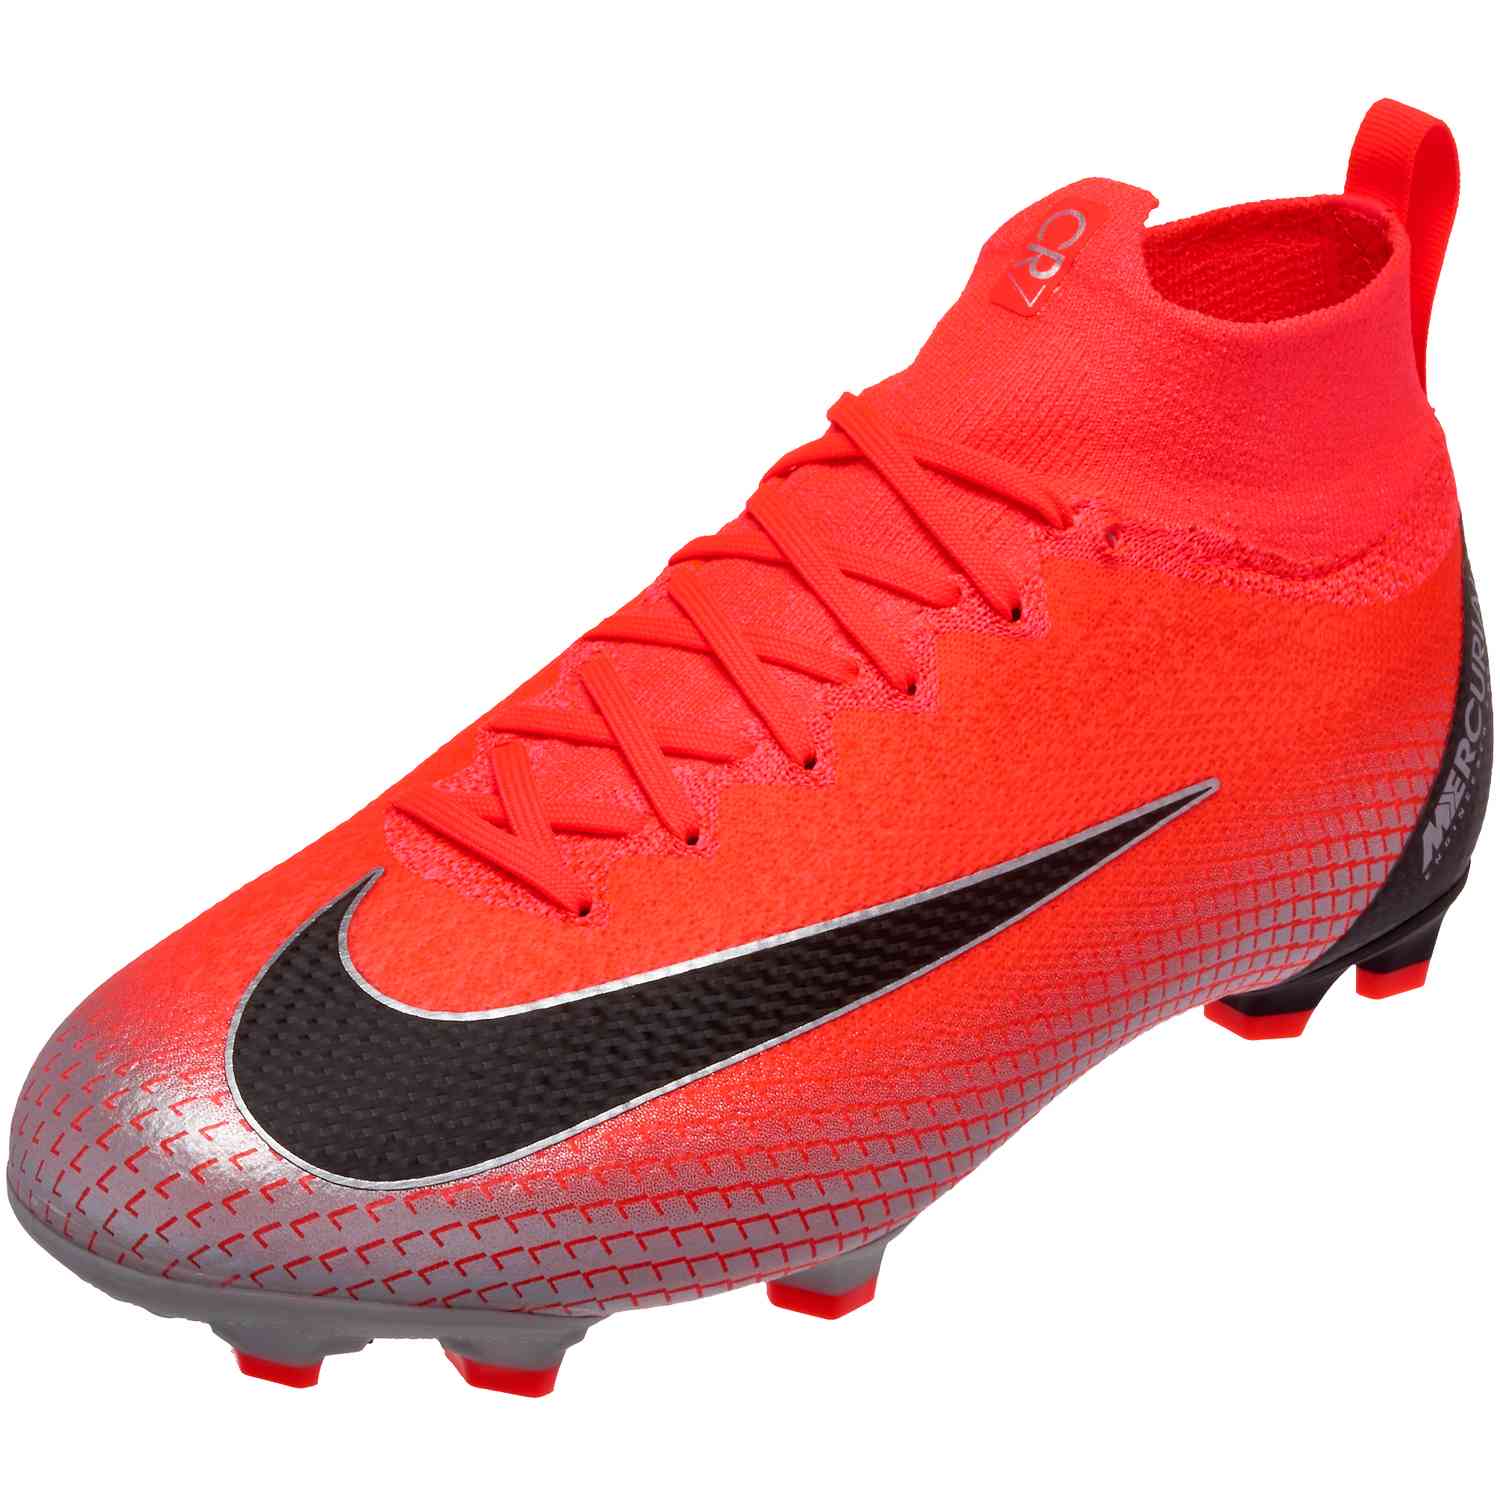 cr7stiano cleats